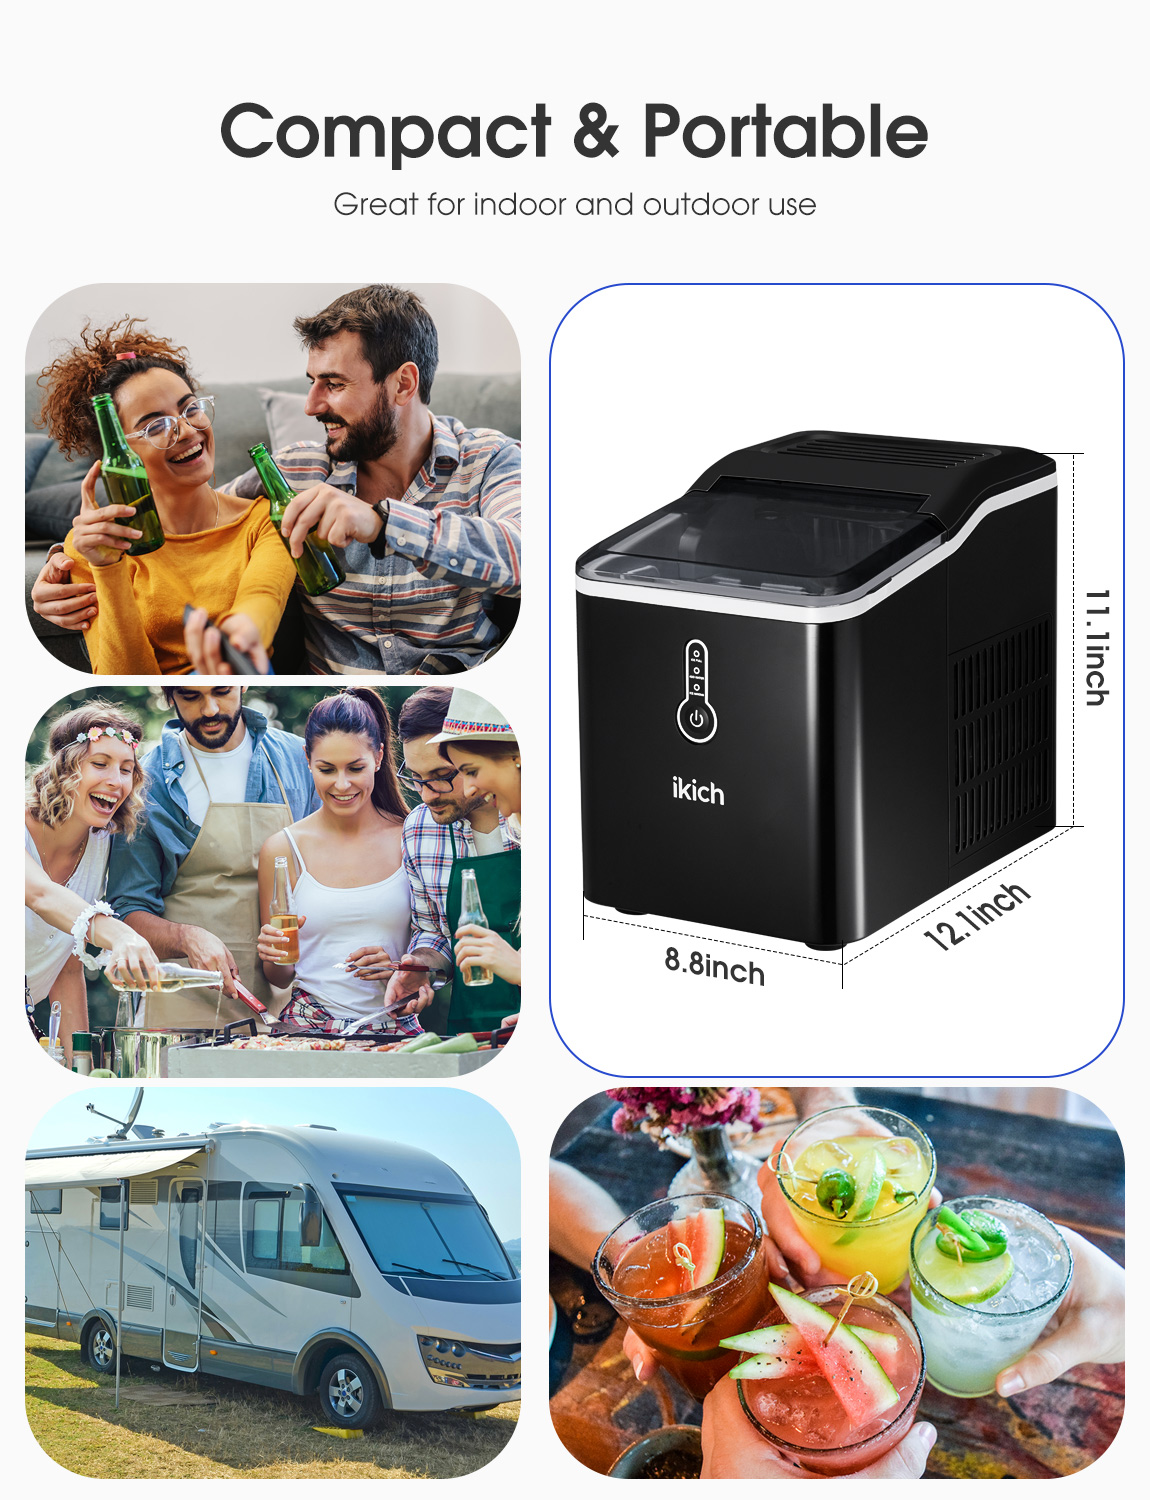 Ikich Portable Ice Maker Machine for Countertop, Self Cleaning, 26Lbs/Day, LED Indicator Lights, Black